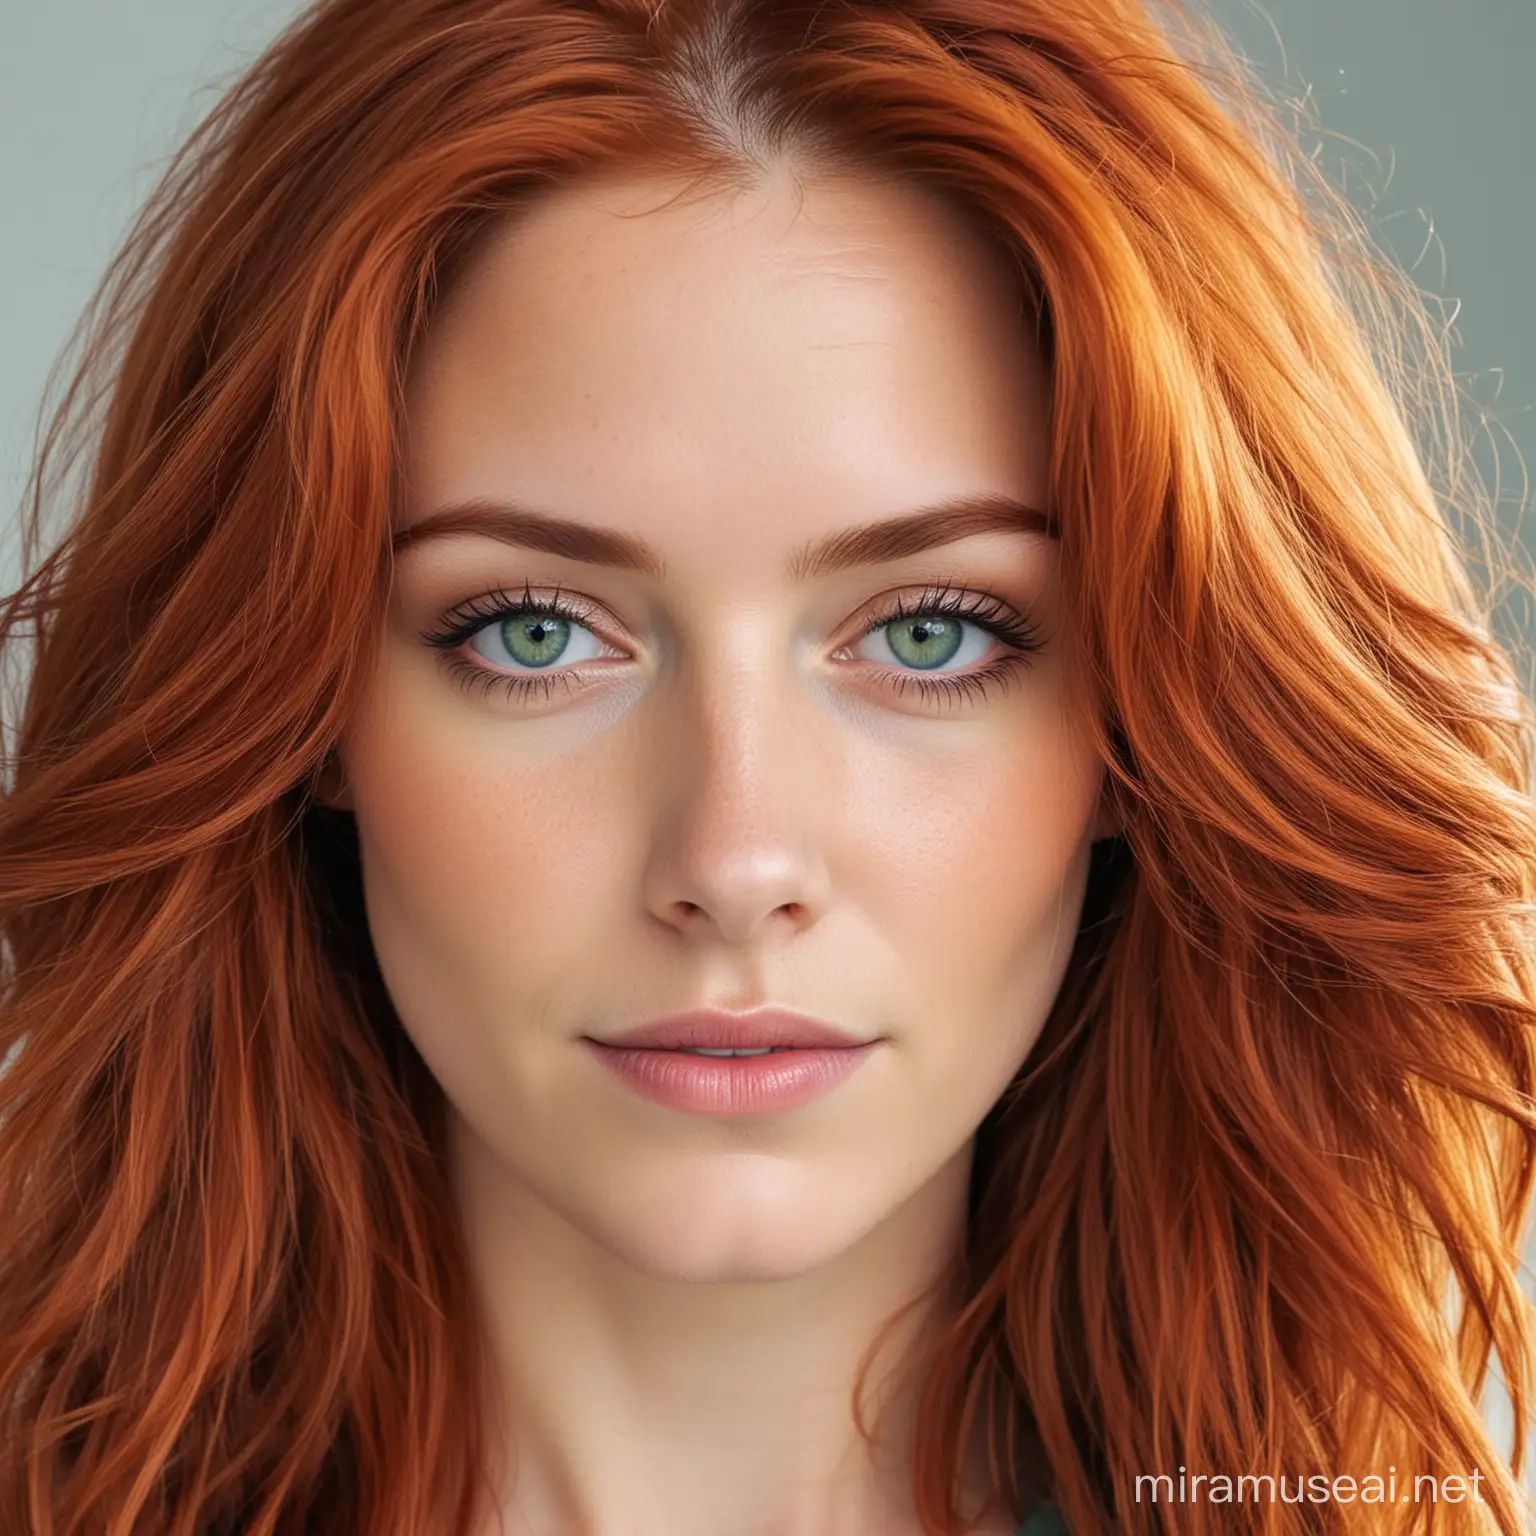 White Woman with Red Hair and GreenBlue Eyes Portrait